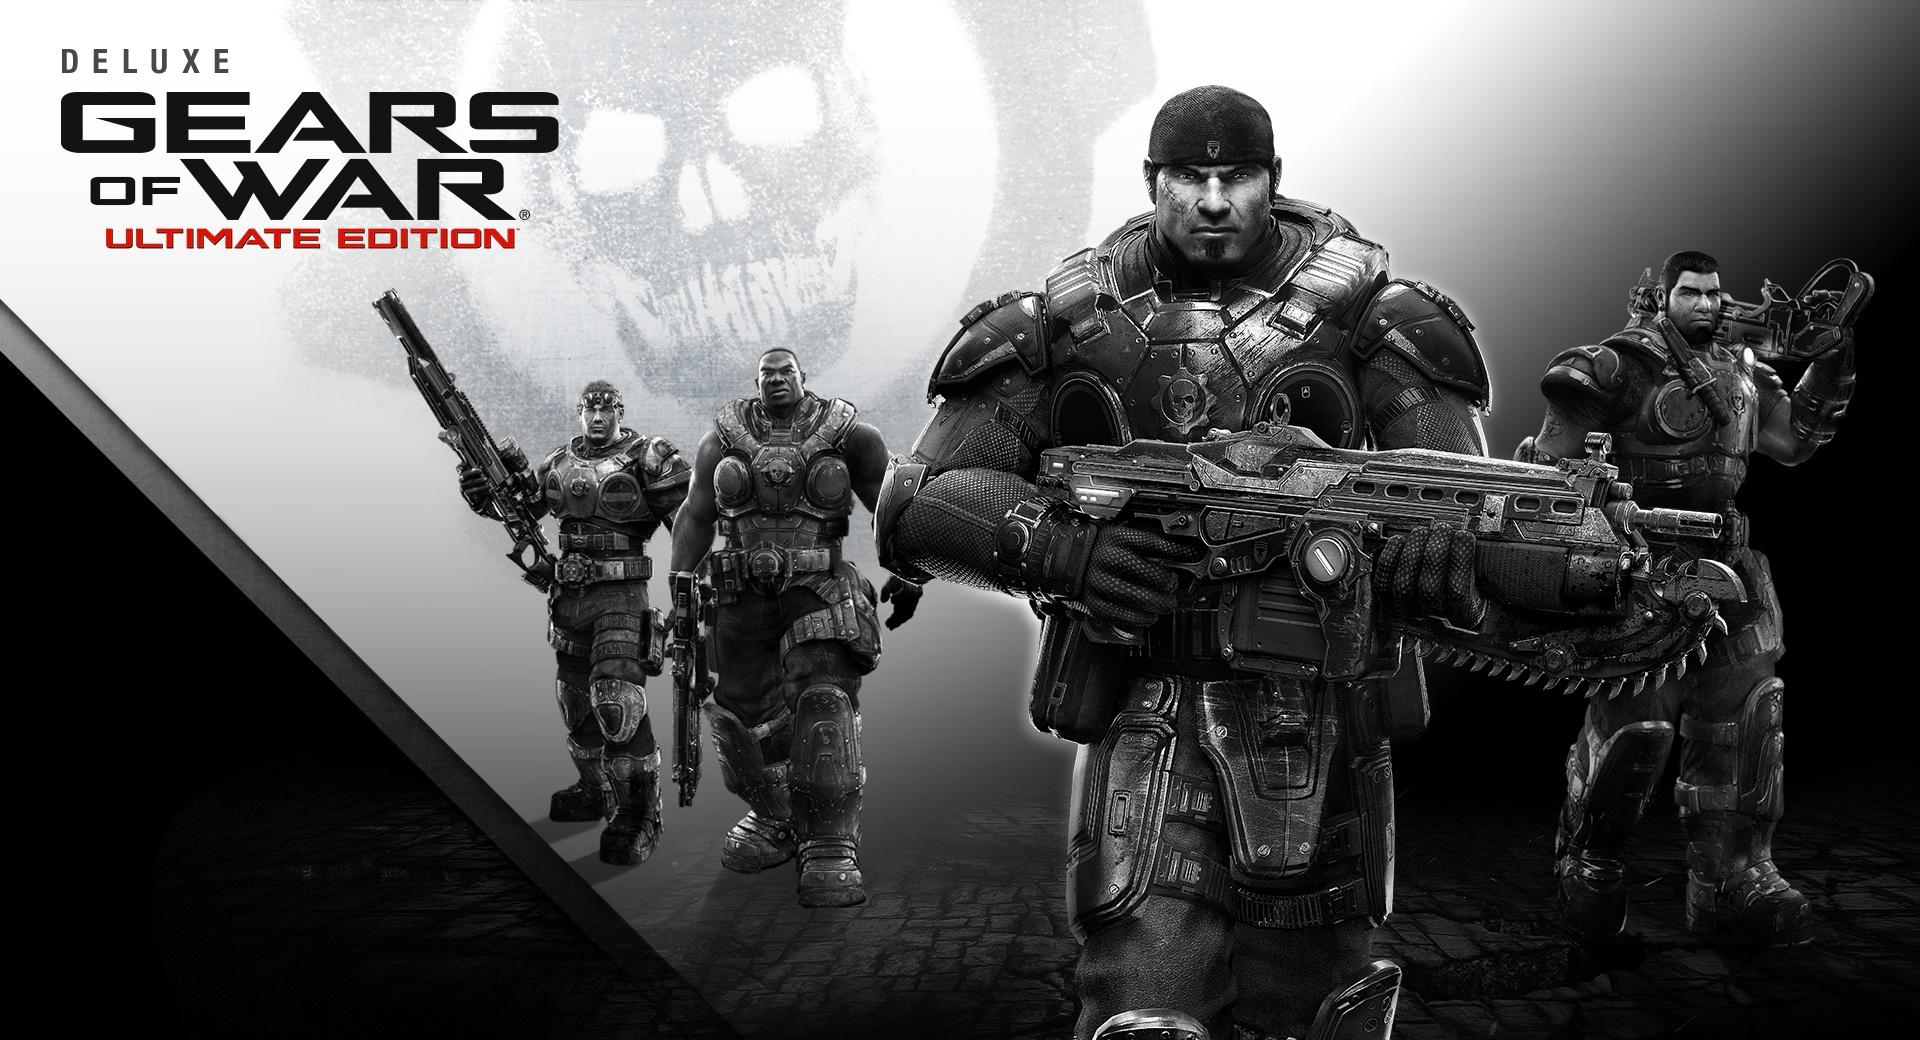 Gears of War Ultimate Edition Deluxe Version wallpapers HD quality